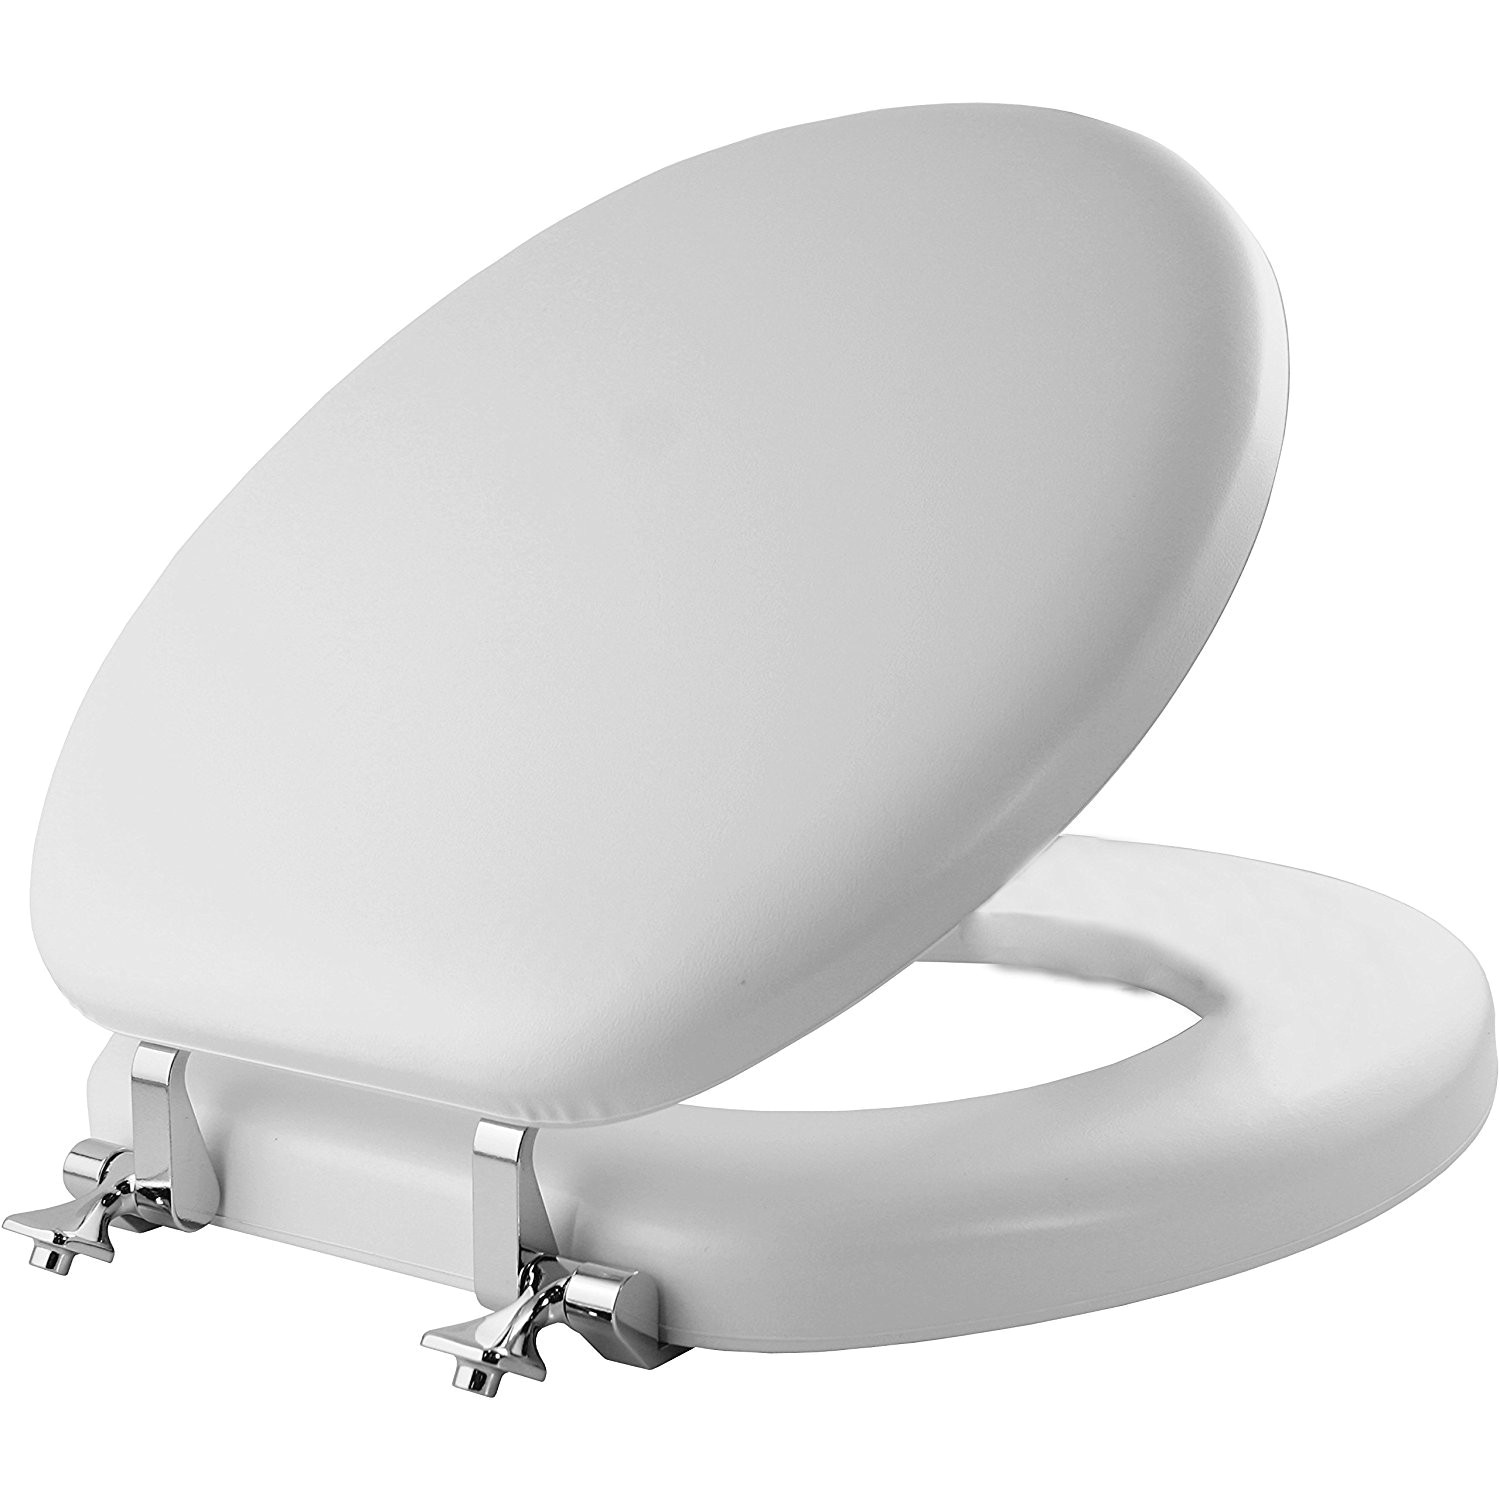 mayfair soft toilet seat with molded wood core and classic chrome metal hinges round